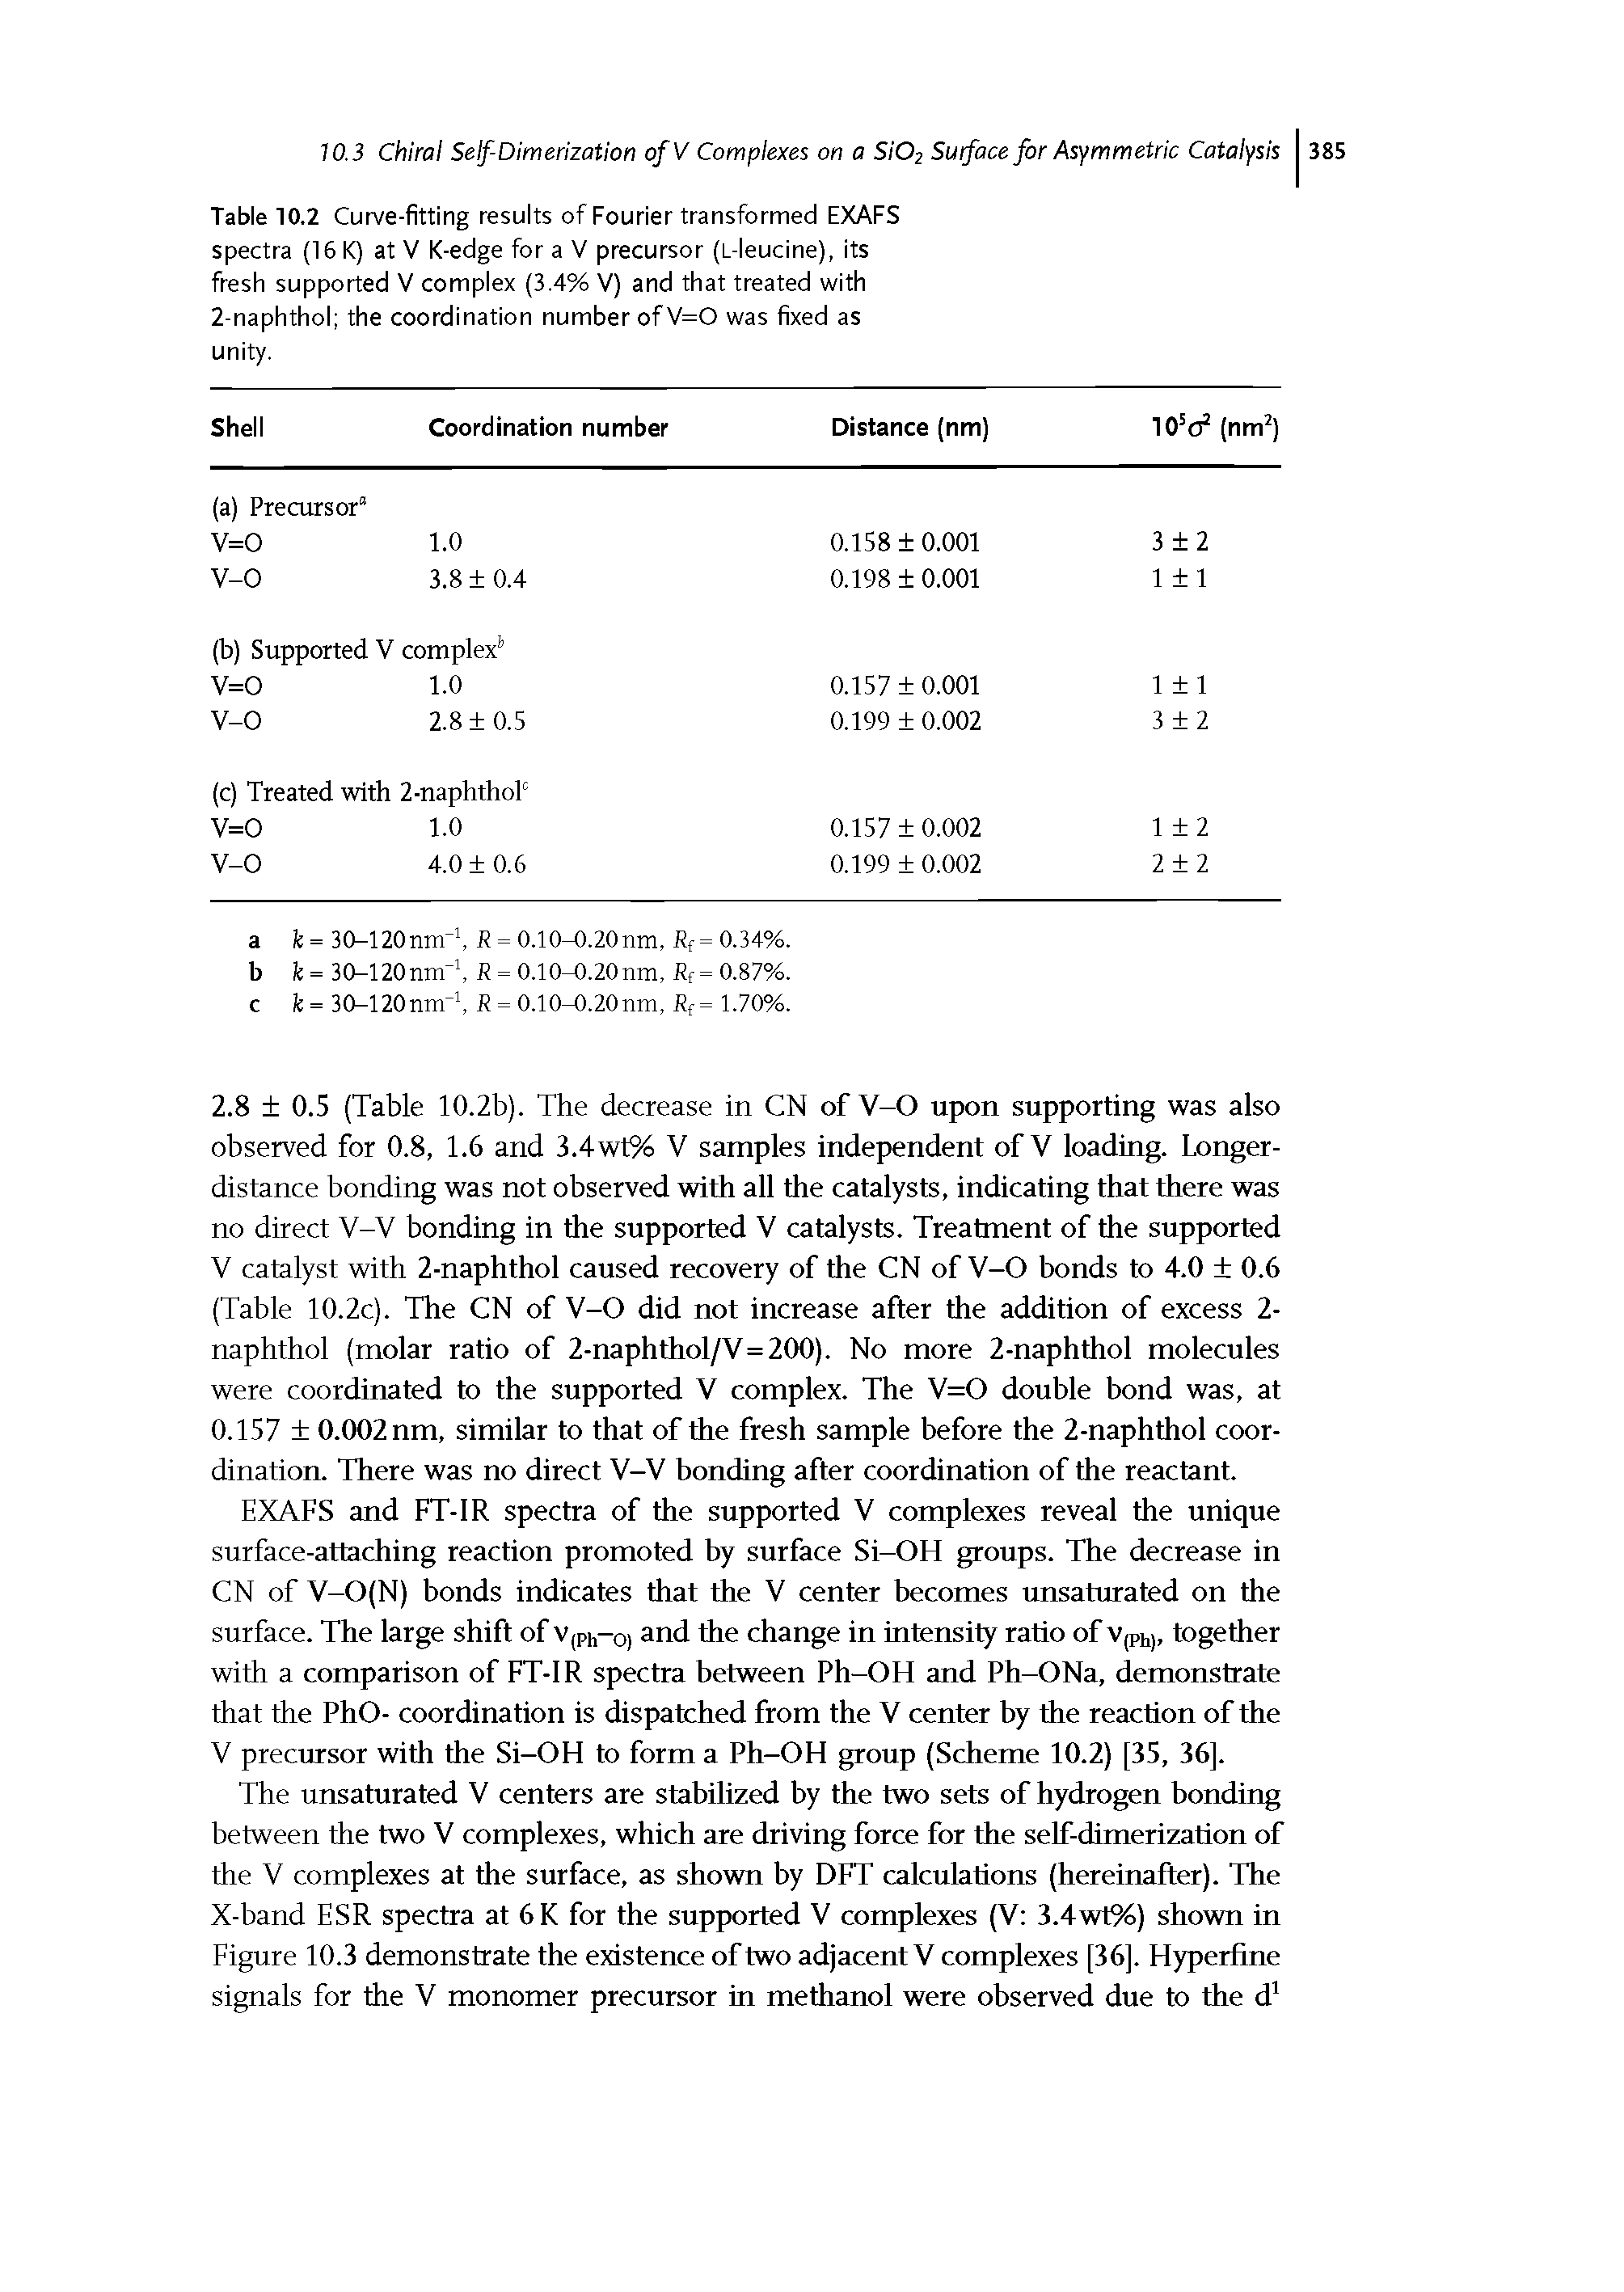 Table 10.2 Curve-fitting results of Fourier transformed EXAFS spectra (16 K) at V K-edge for a V precursor (L-leucine), its fresh supported V complex (3.4% V) and that treated with 2-naphthol the coordination number of V=0 was fixed as unity.